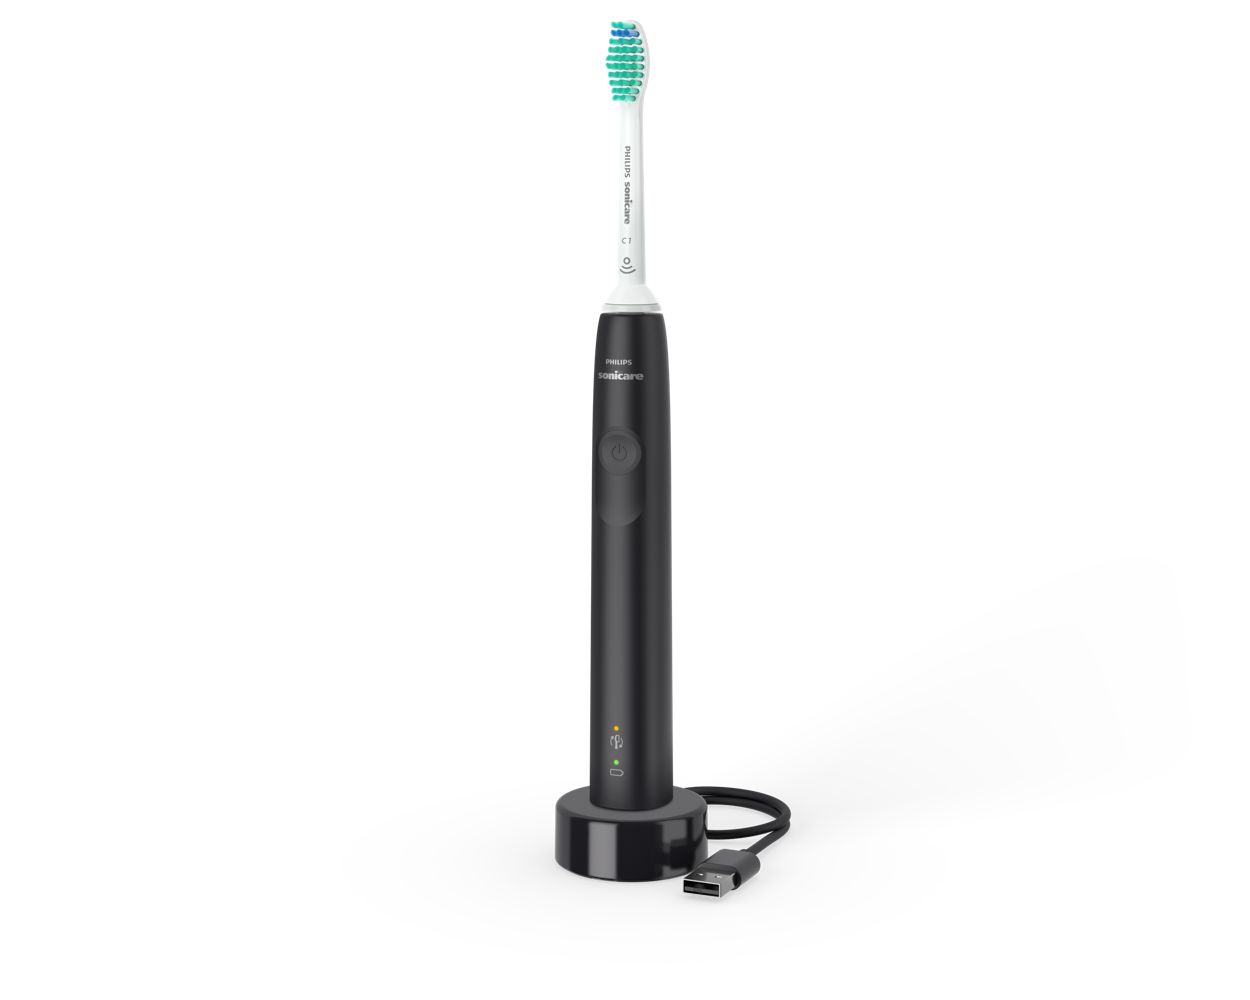 3100 series Sonic electric toothbrush - Black HX3671/14 | Sonicare